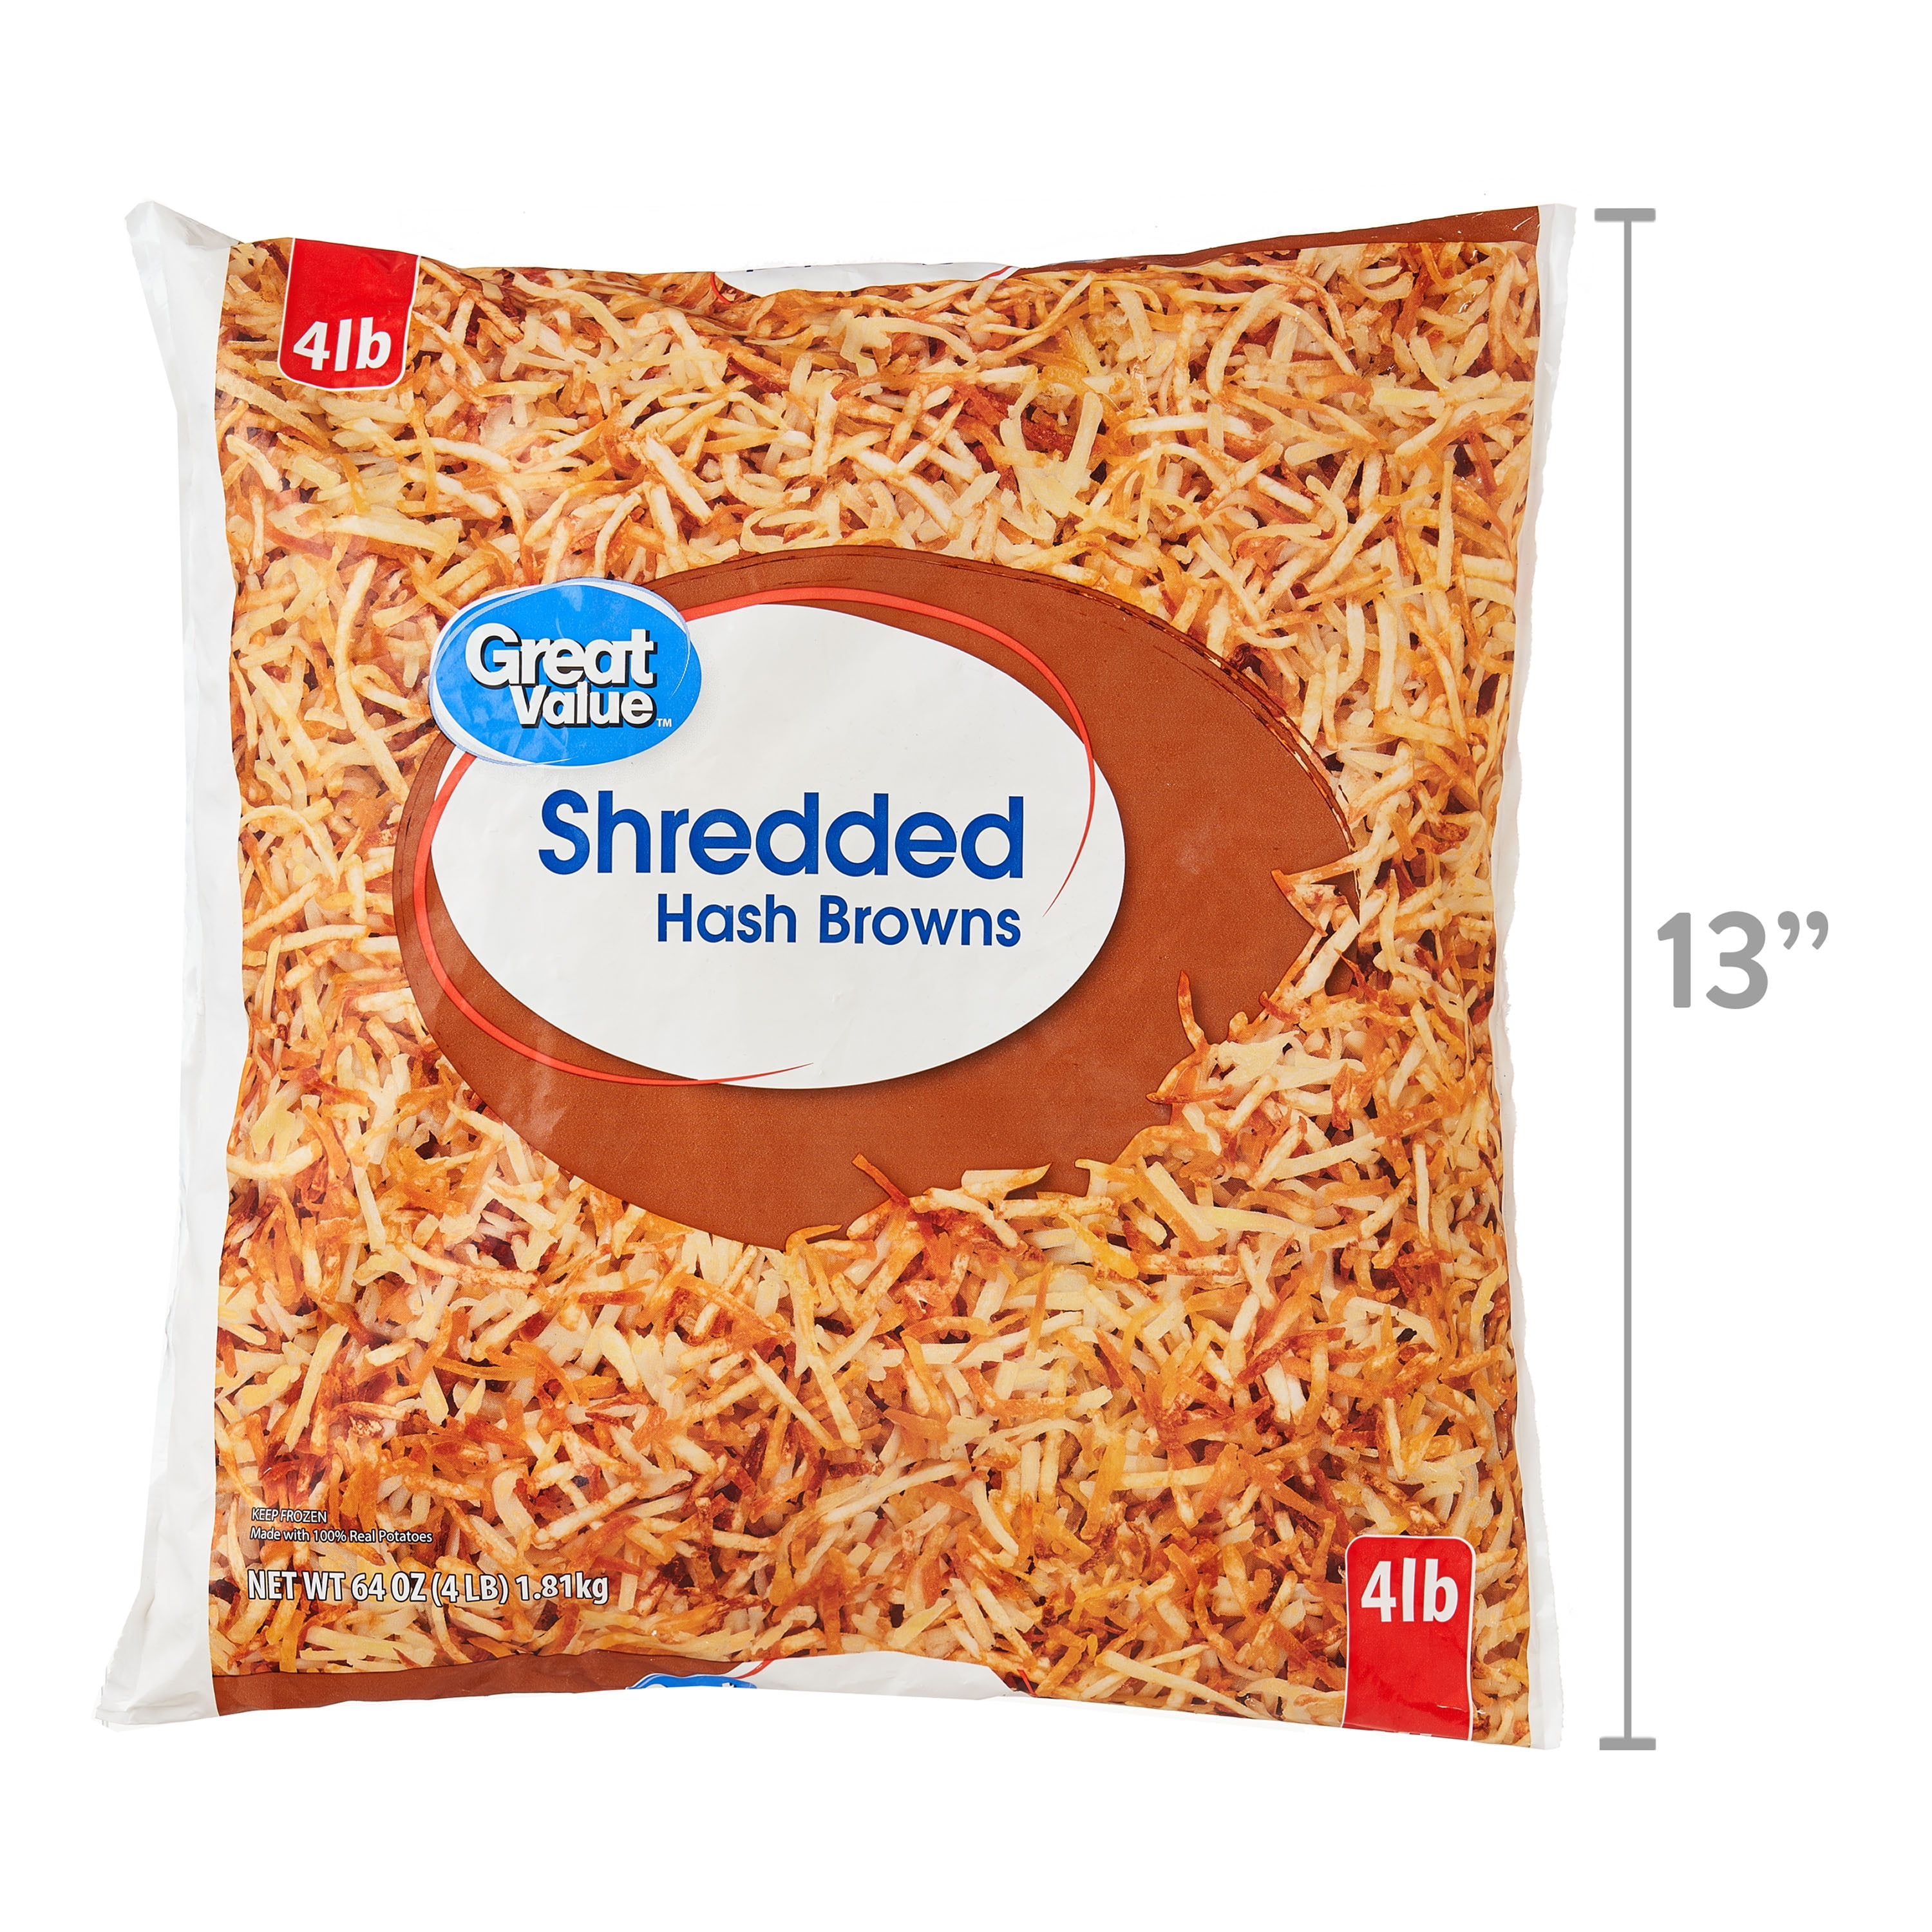 How To Cook Shredded Hash Browns From Bag 